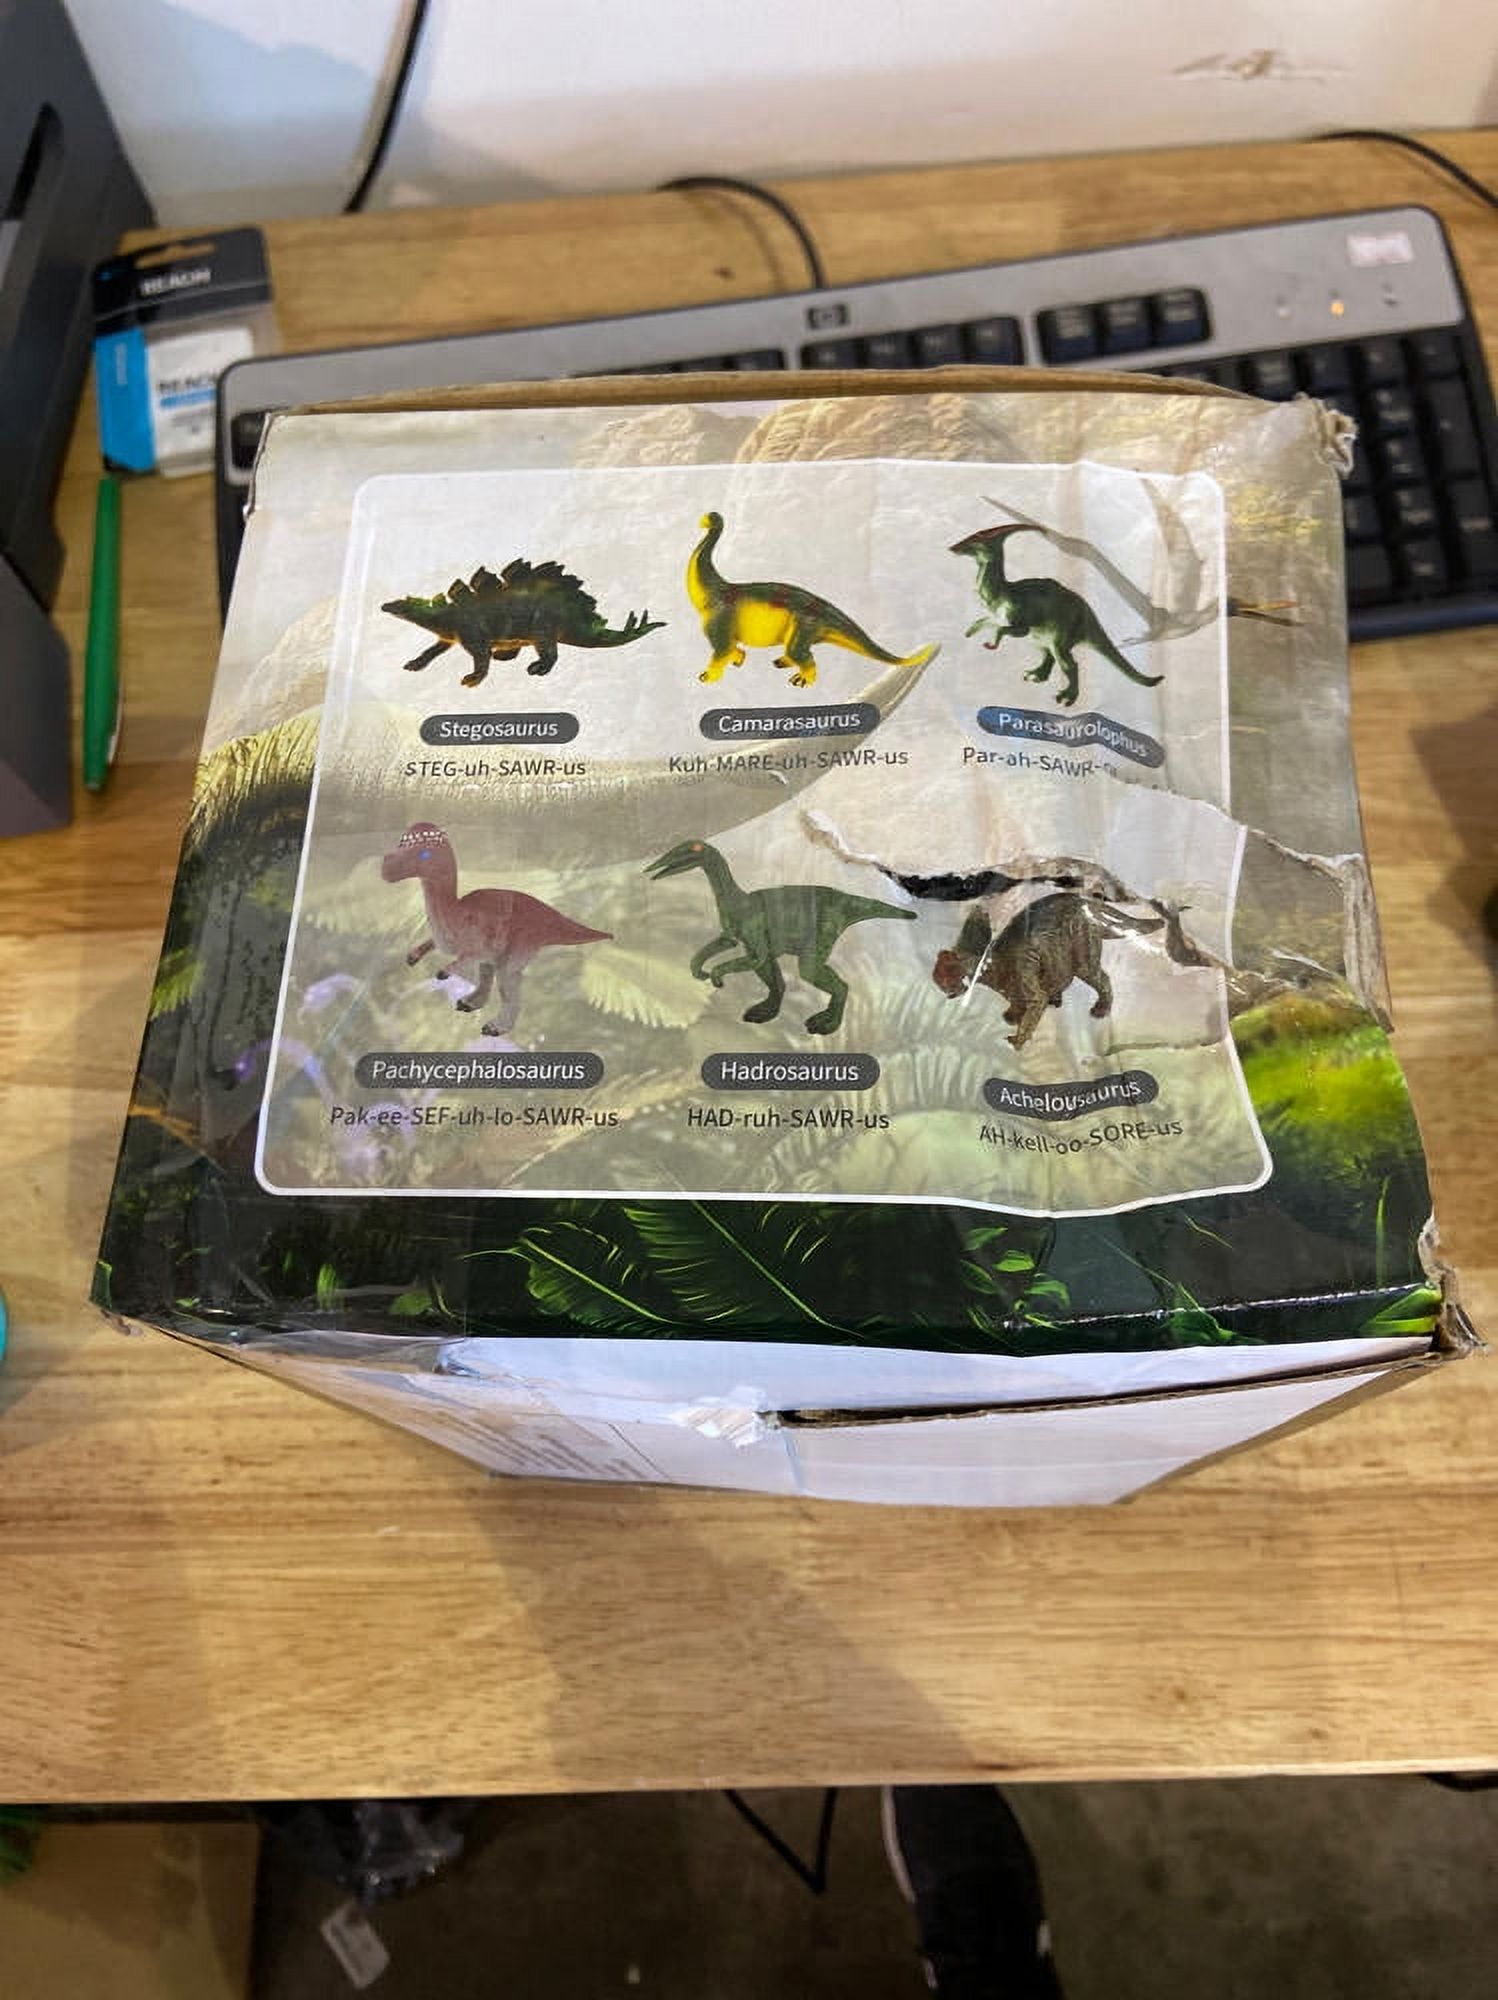 Dinosaur Toys with Dinosaur Figures, Activity Play Mat & Trees for Creating a Dino World Including T-Rex, Triceratops, etc, Perfect Dinosaur Playset for 3,4,5,6 Years Old Kids, Boys & Girls - image 2 of 6